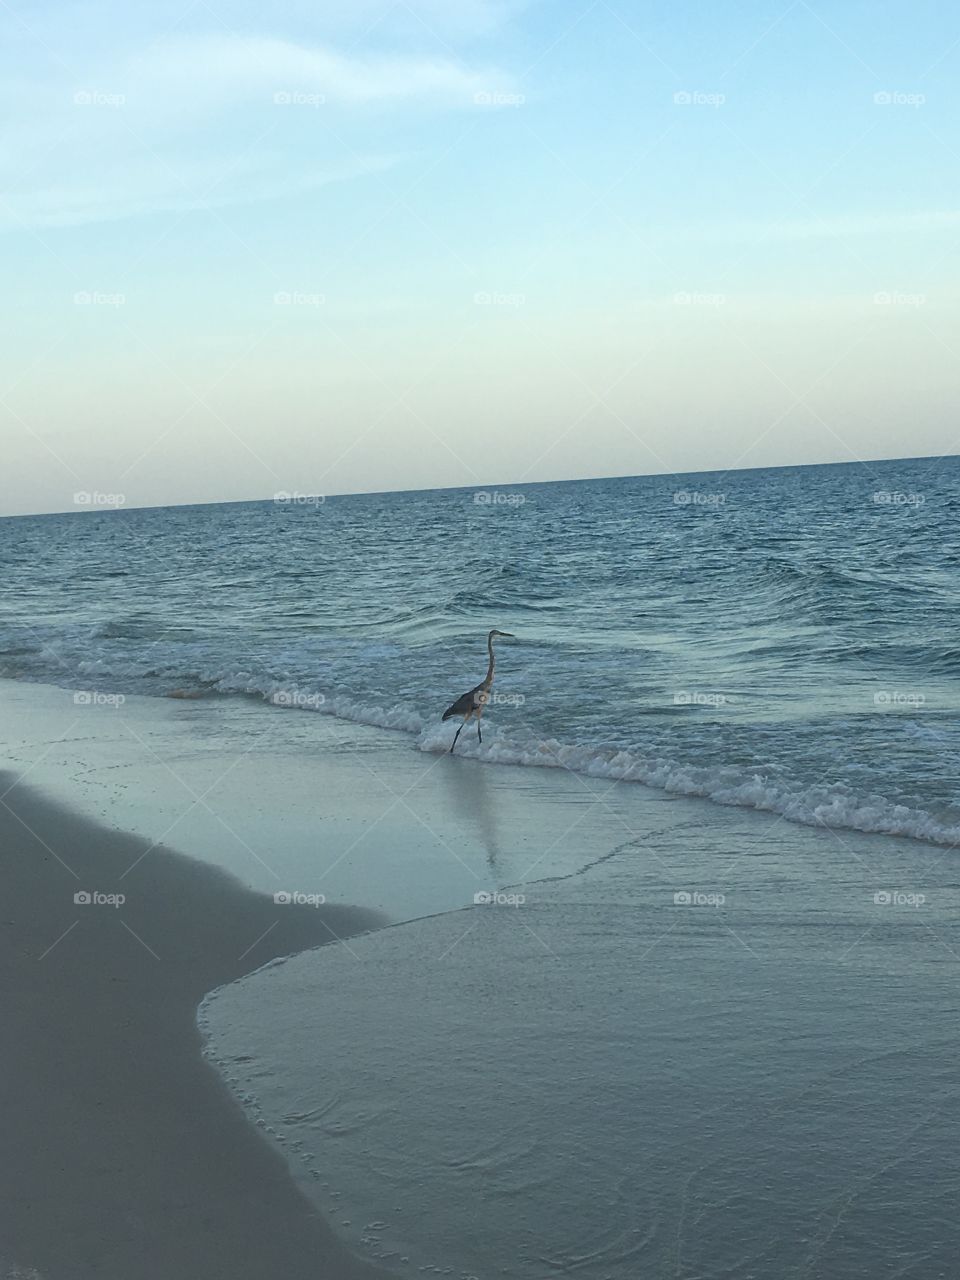 Heron in the water on the beach at Gulf Shores. 